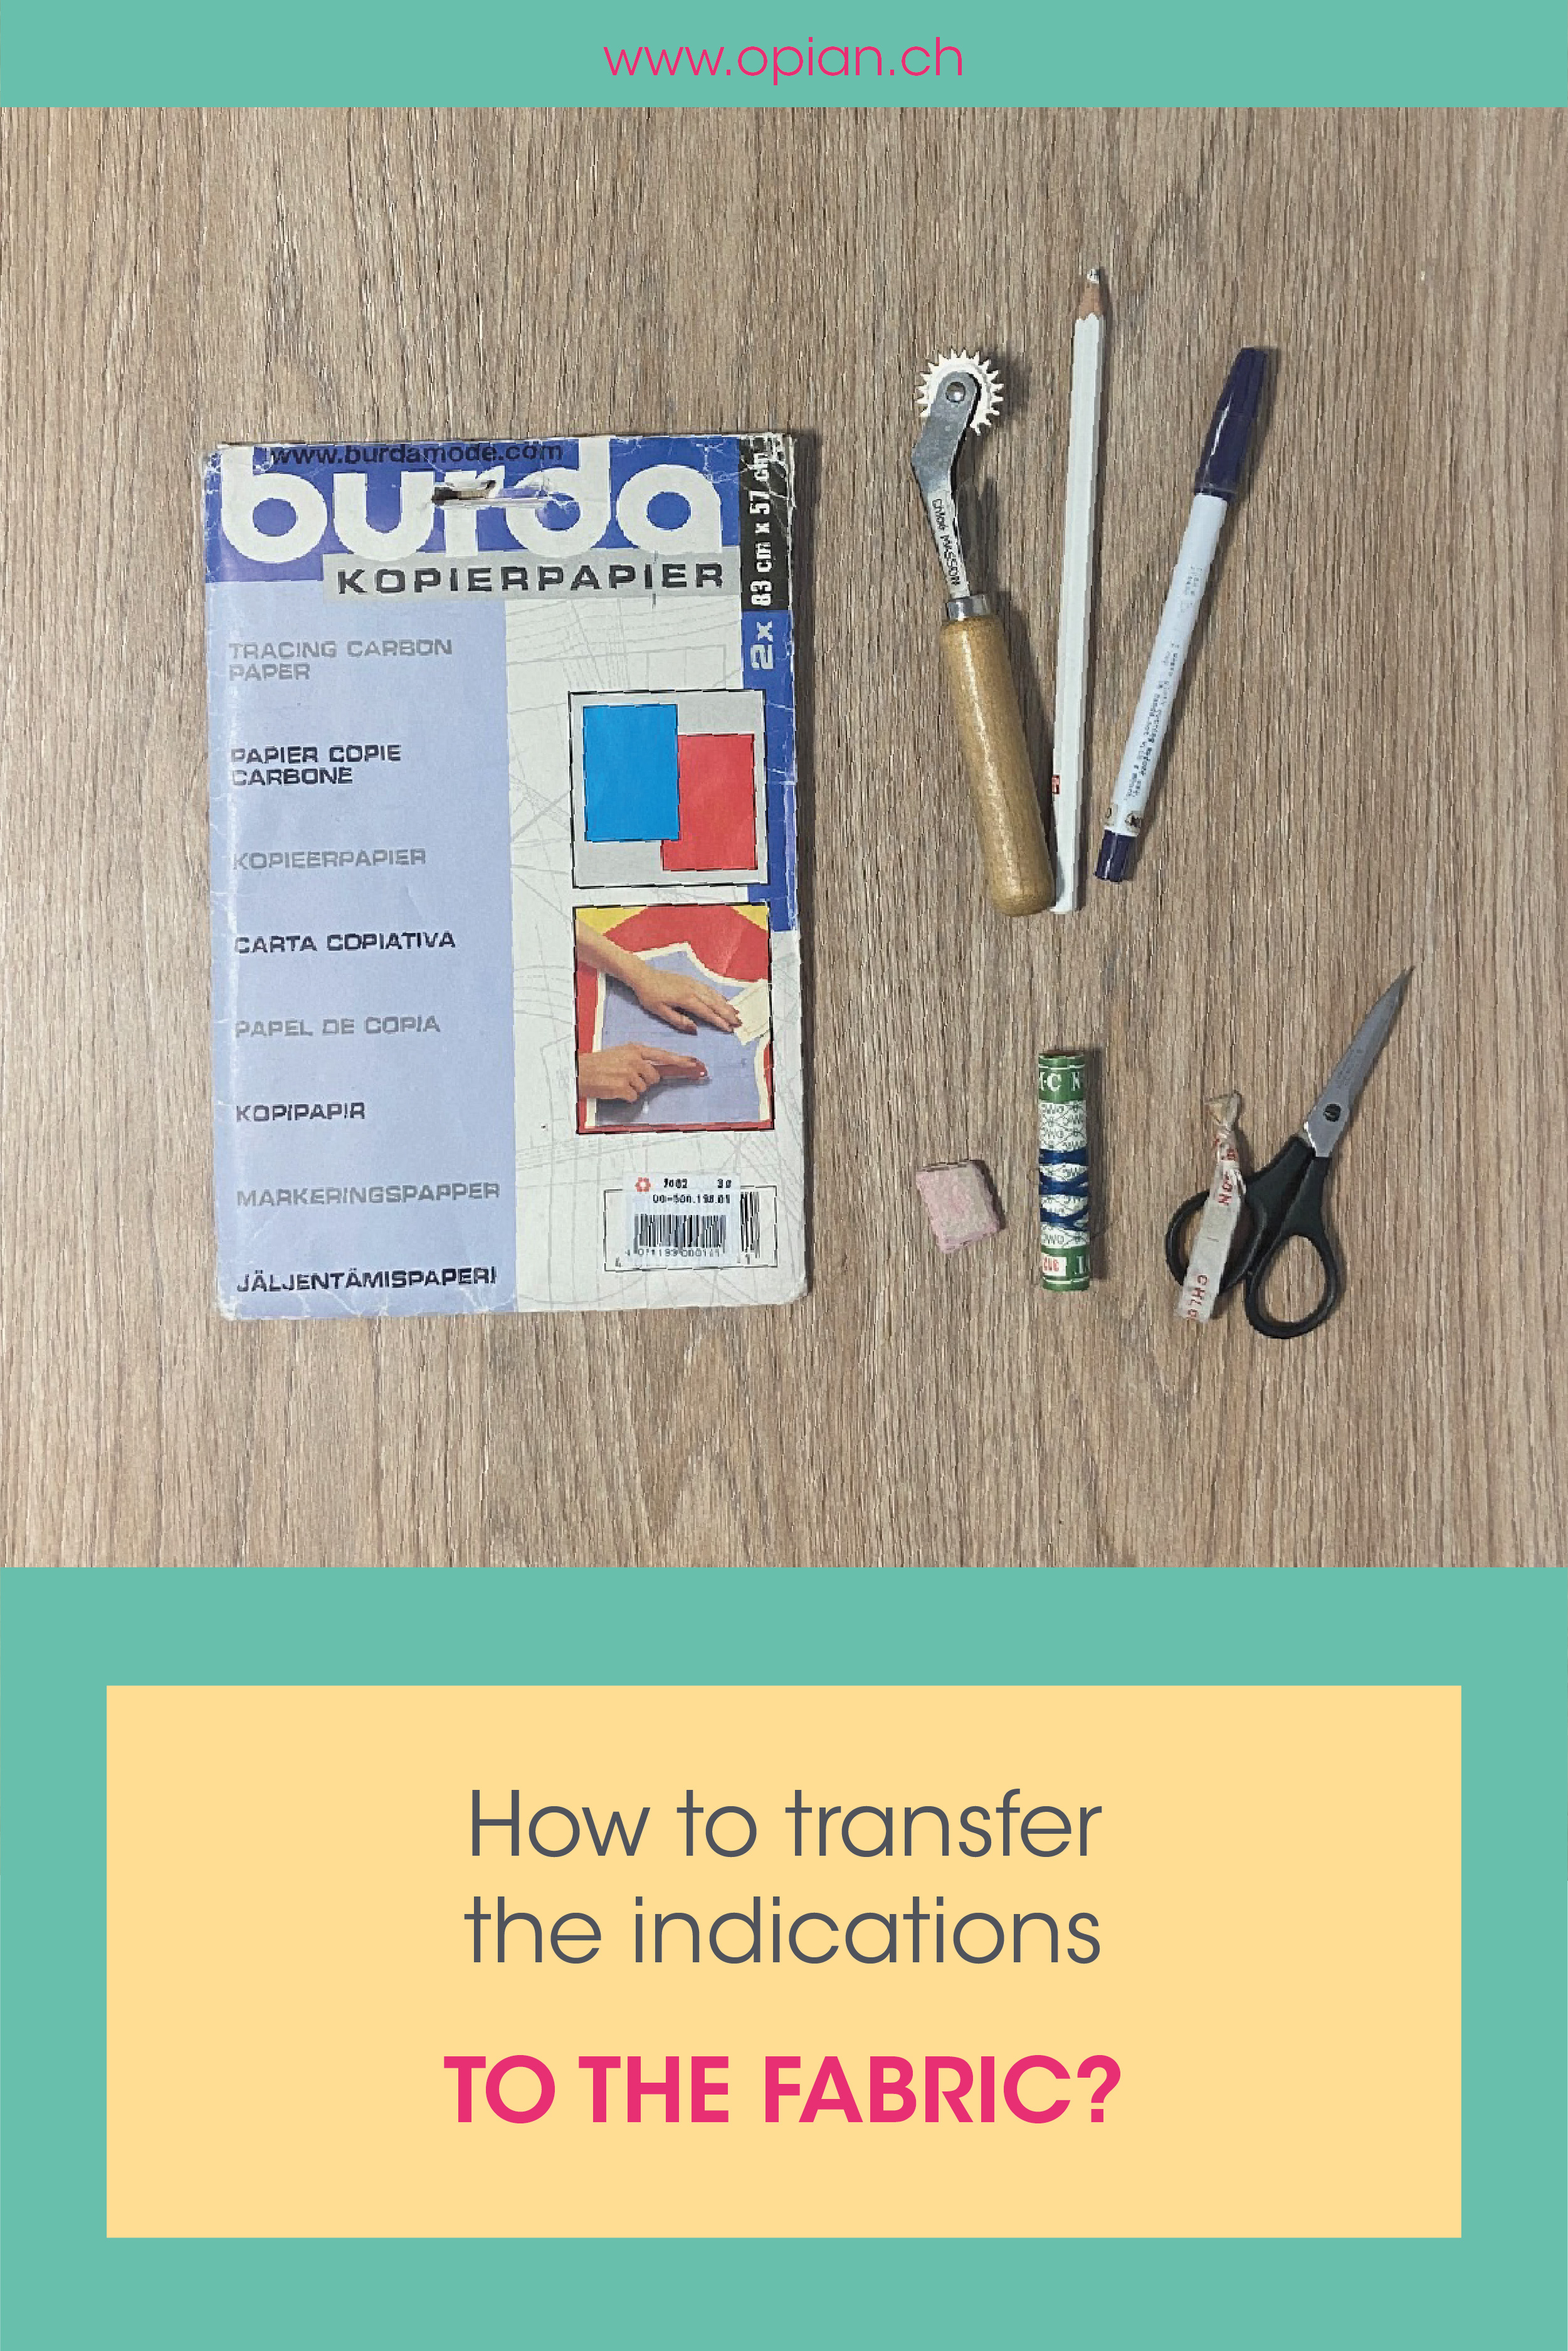 How to transfer indications to the fabric